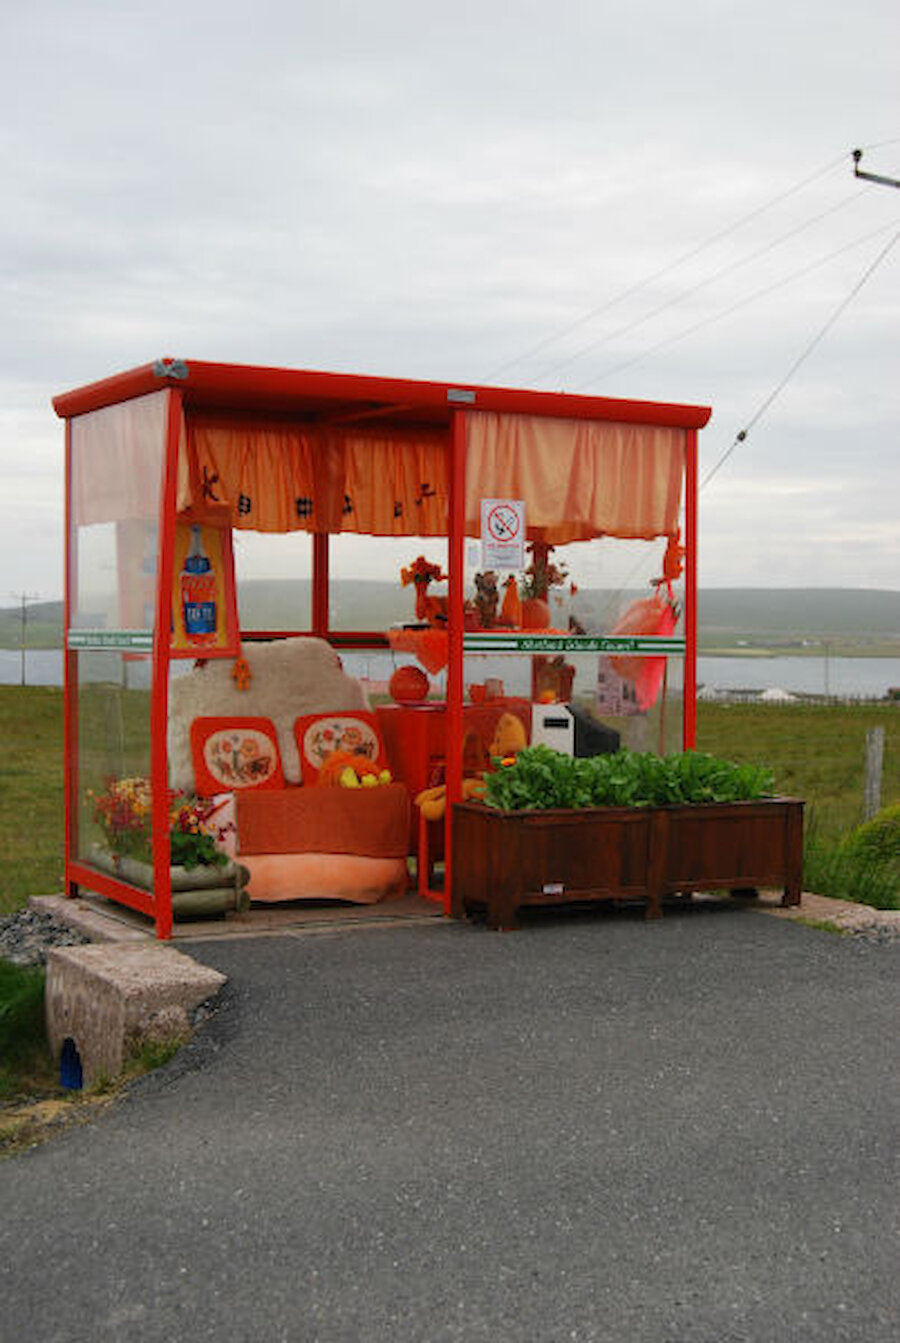 The Unst Bus Shelter looks equipped for quite a long stay (Courtesy Alastair Hamilton)